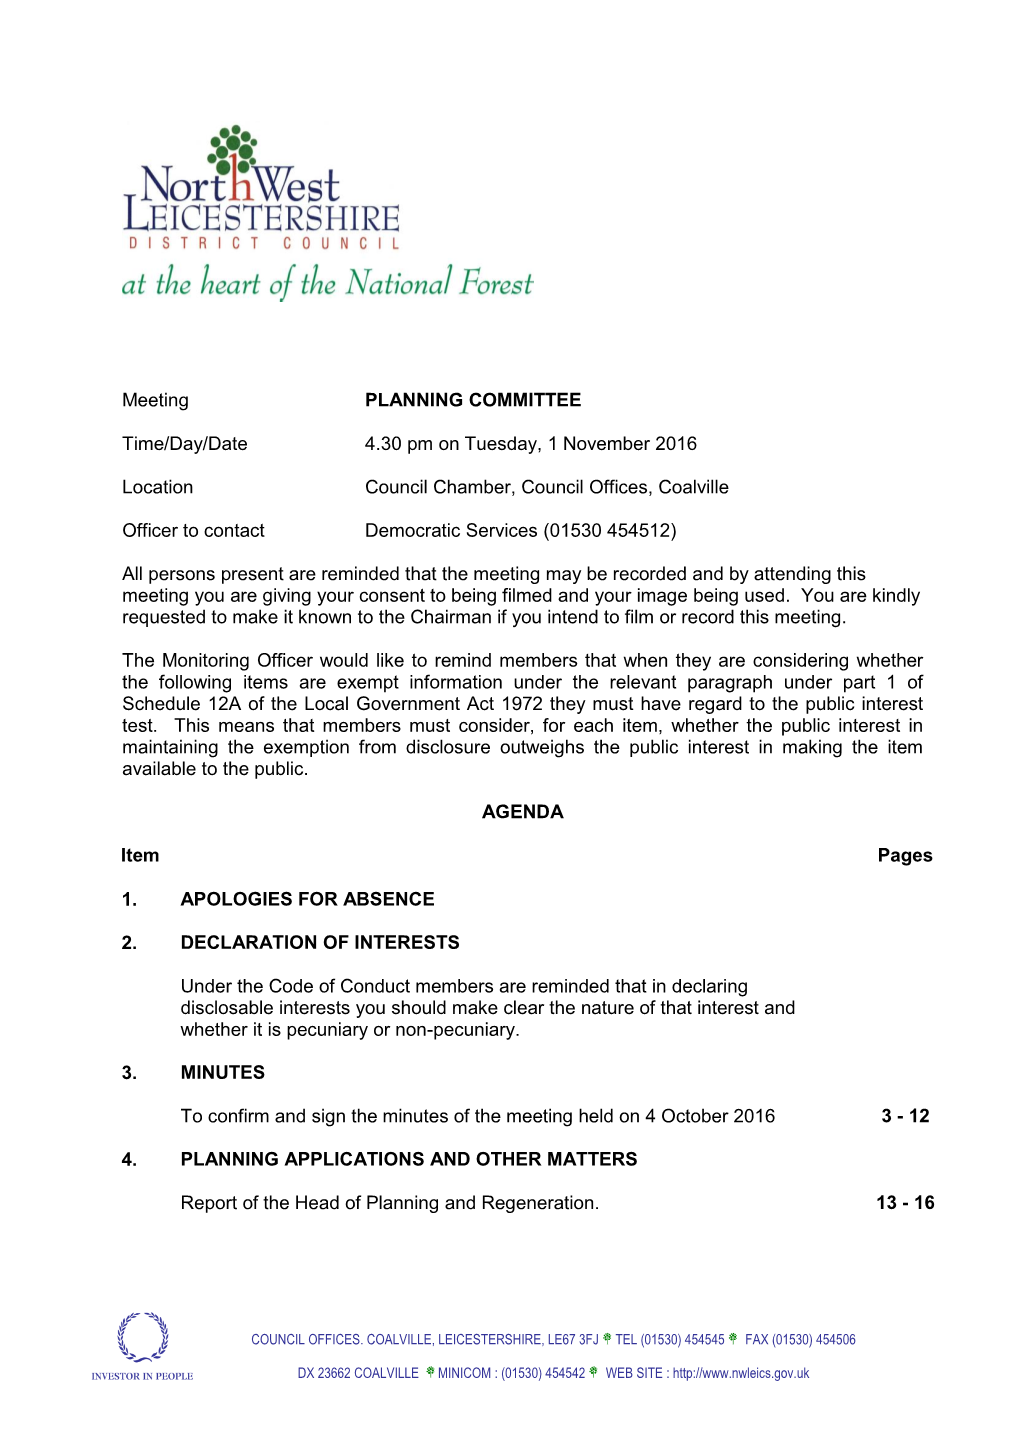 (Public Pack)Agenda Document for Planning Committee, 01/11/2016 16:30